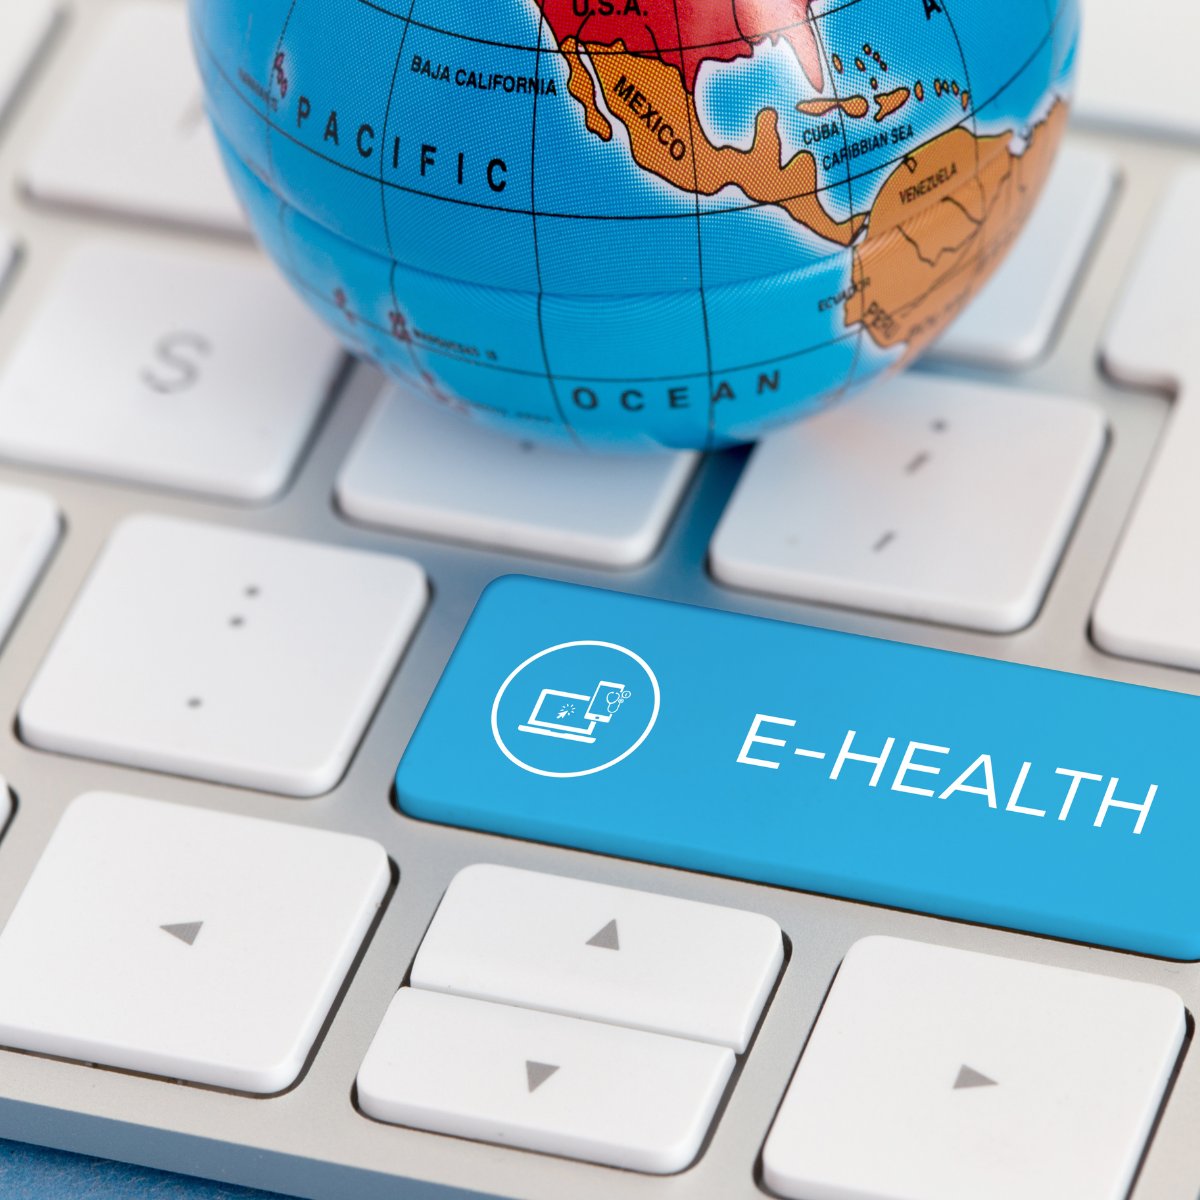 Een nieuwe publicatie in de series: eHealth in primary care. Part 6: Global perspectives: Learning from eHealth for low-resource primary care settings and across high-, middle- and low- income countries. Te lezen op onze publicaties site via de link! ow.ly/kNLY50PEemM